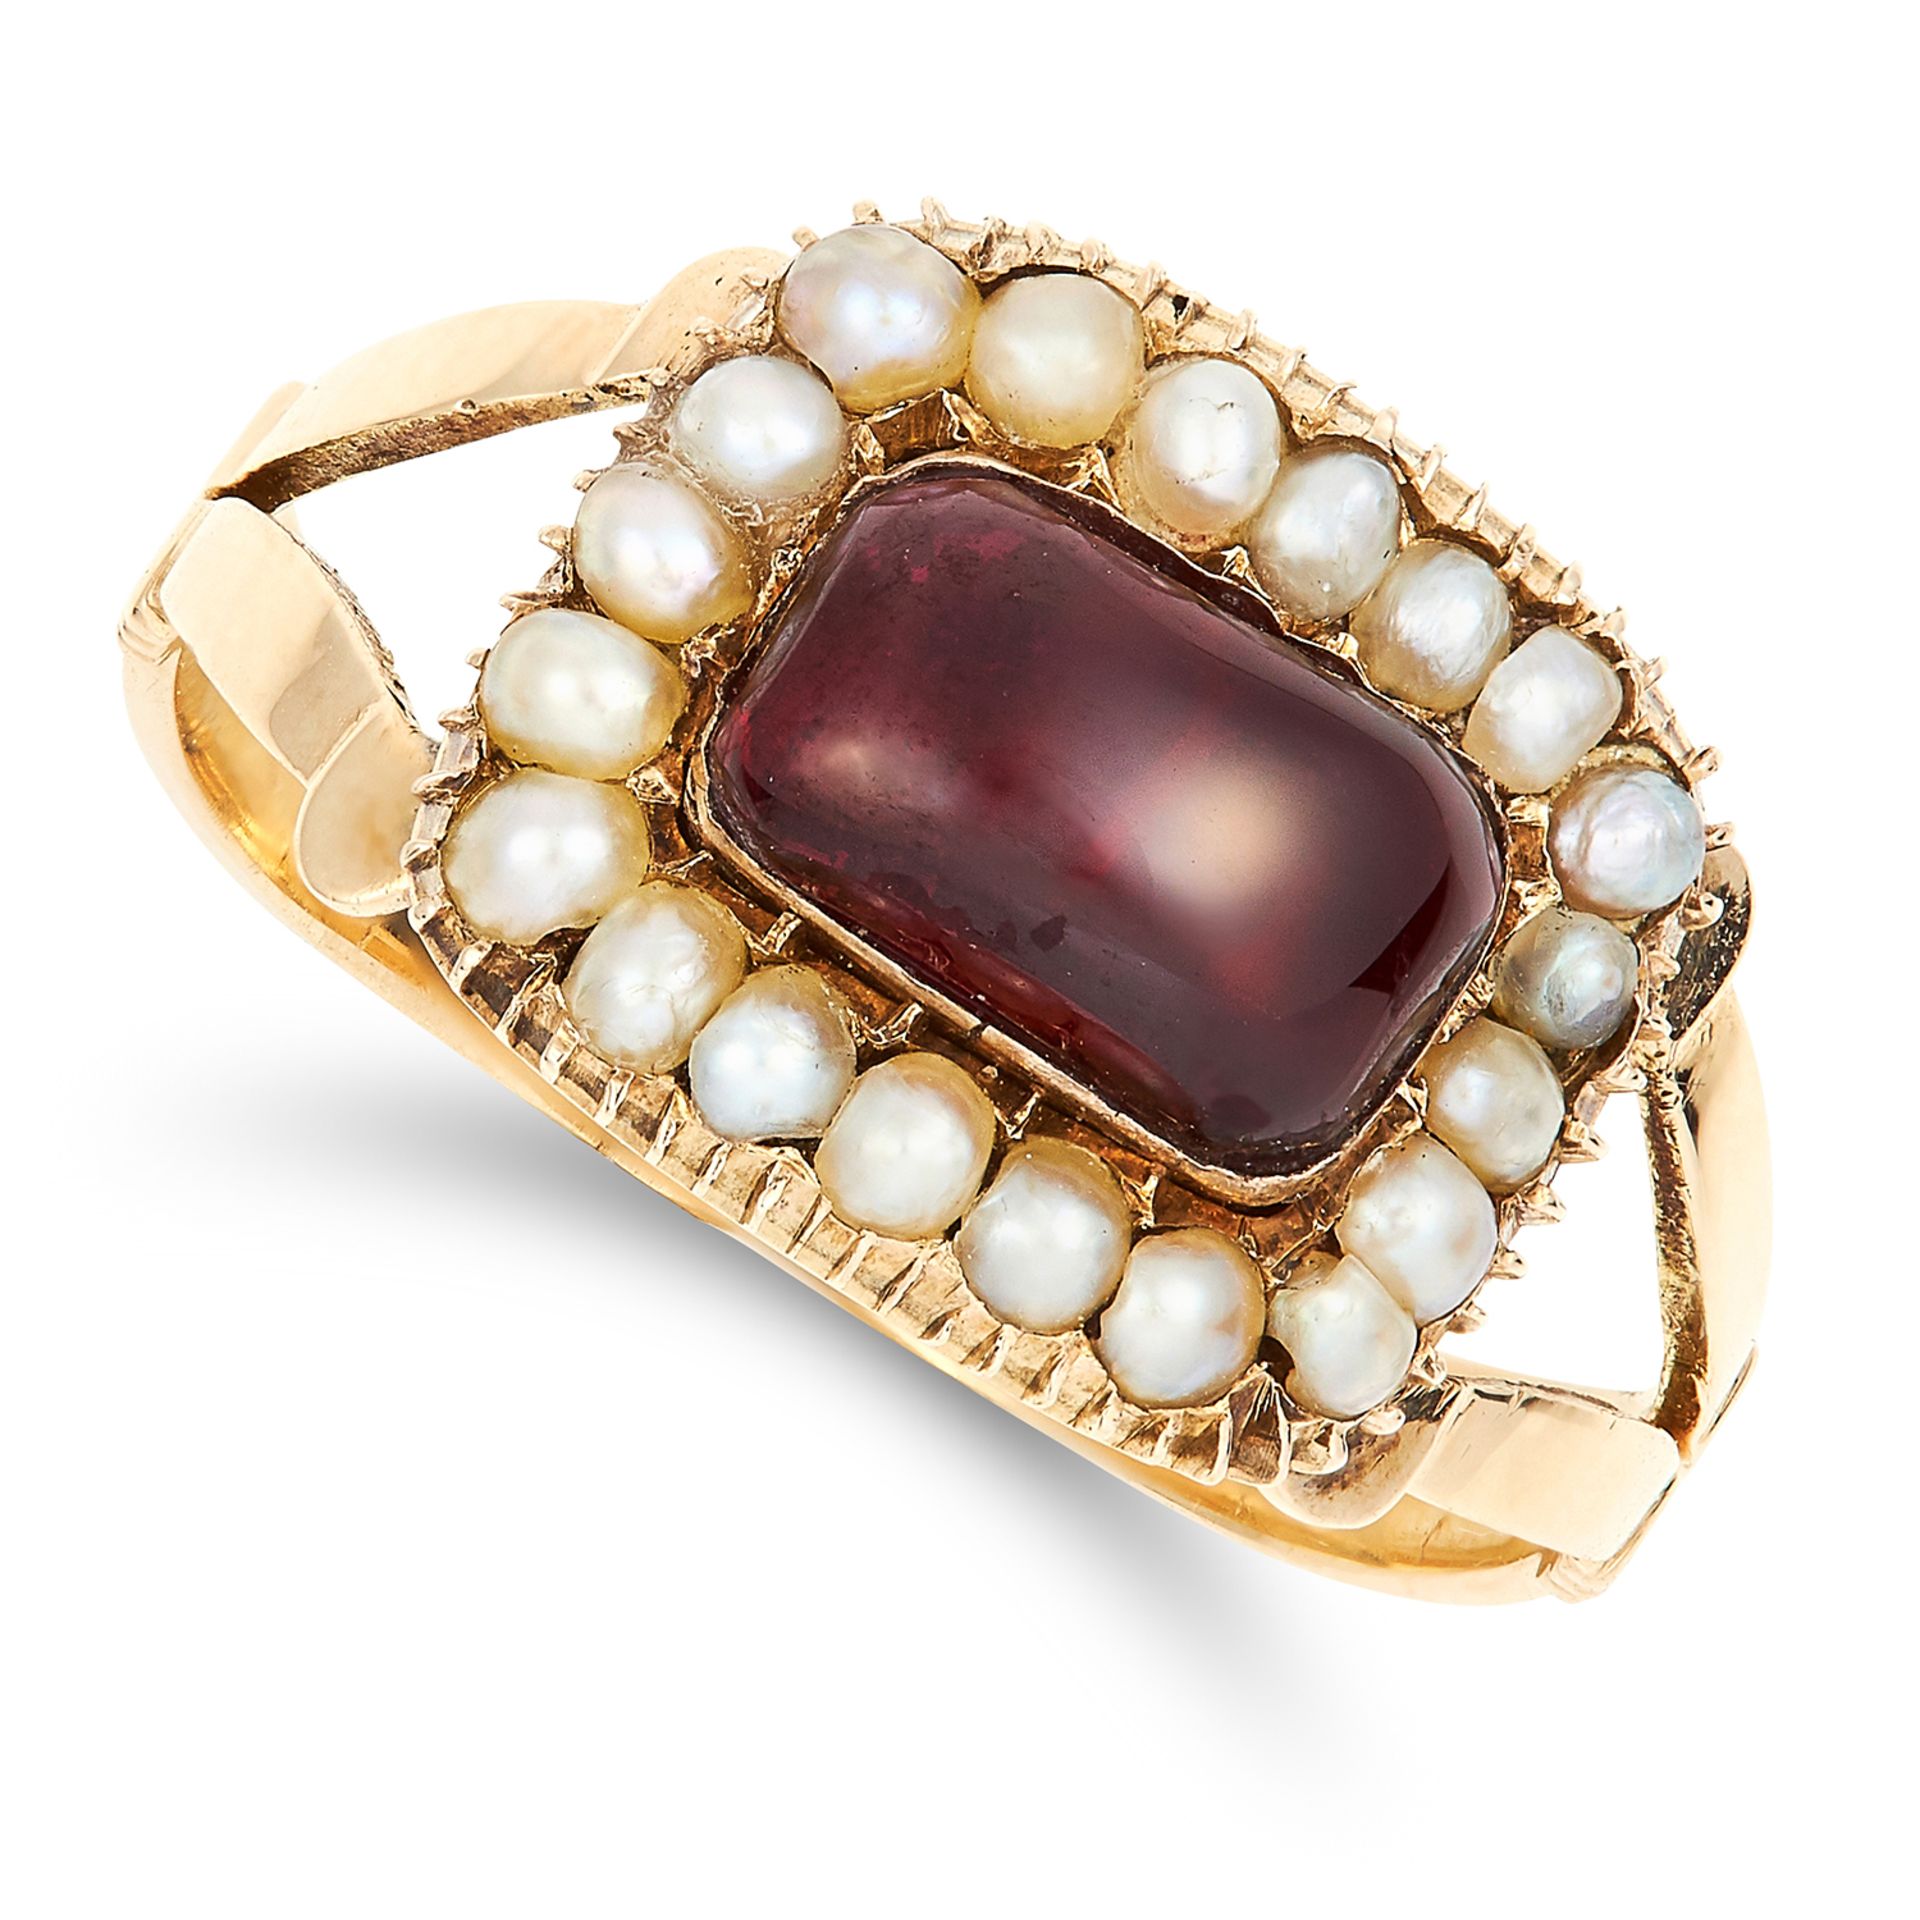 ANTIQUE GARNET AND PEARL MOURNING RING, CIRCA 1825 set with a rectangular cabochon garnet and seed